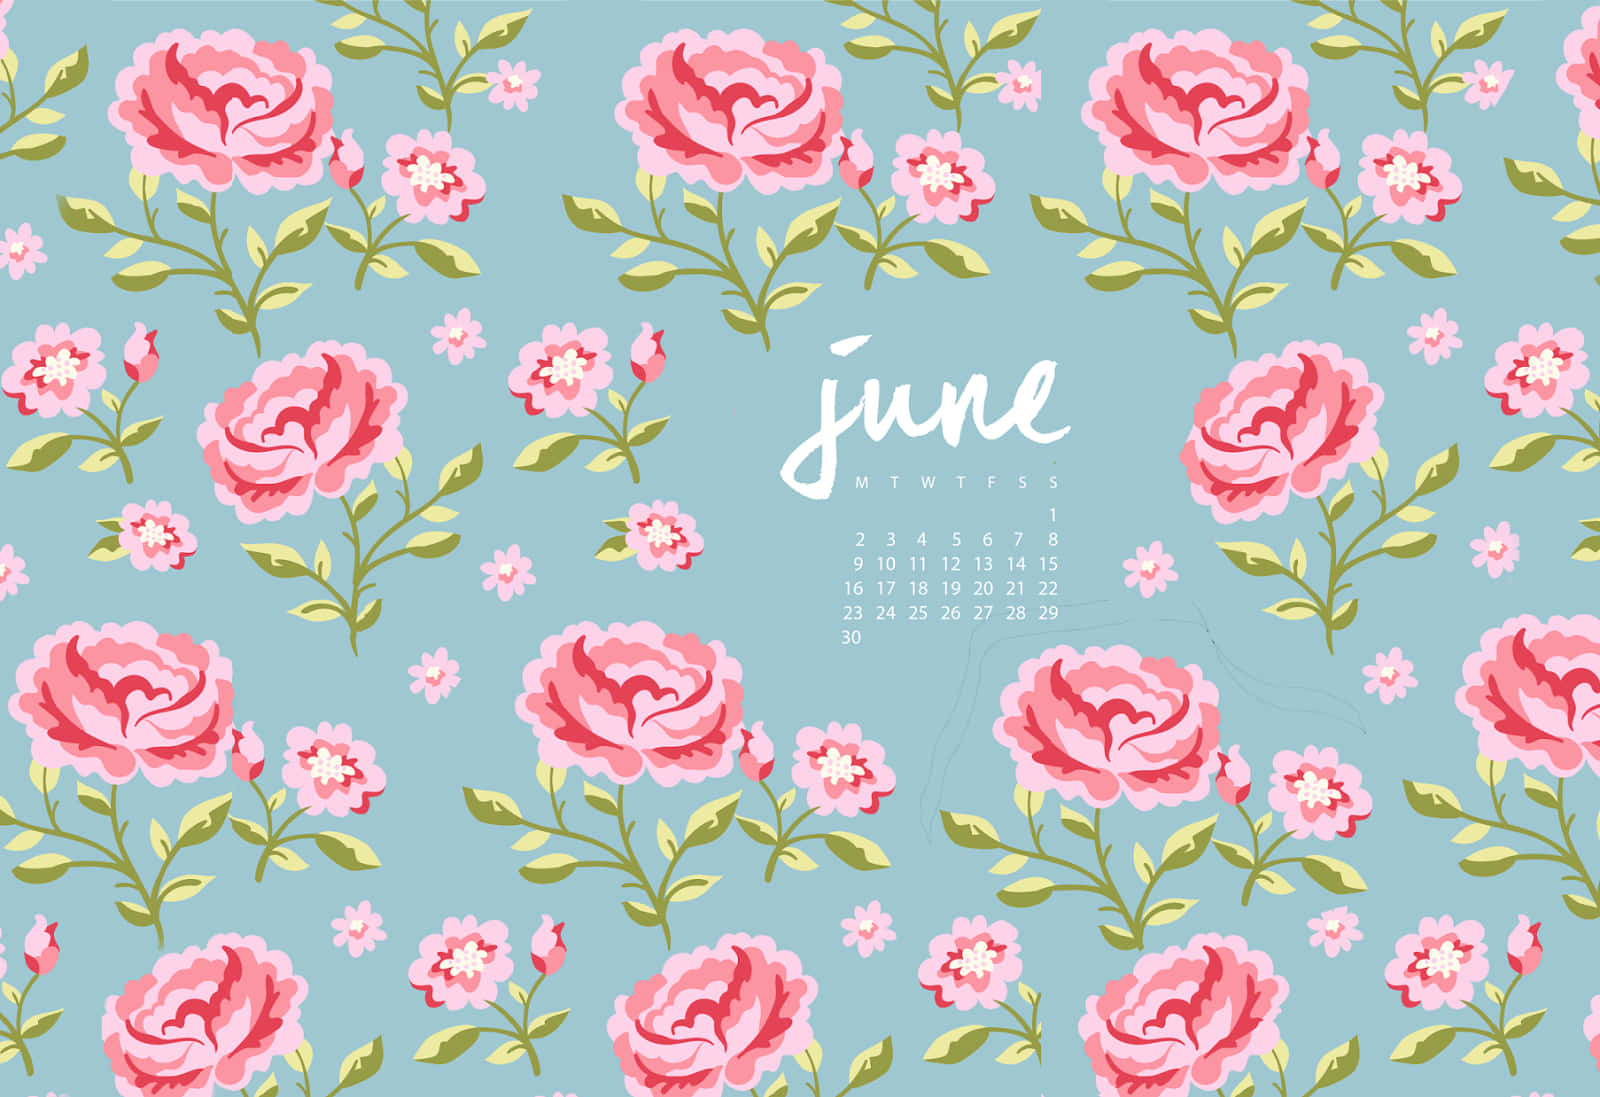 Welcome the sunshine of June! Wallpaper